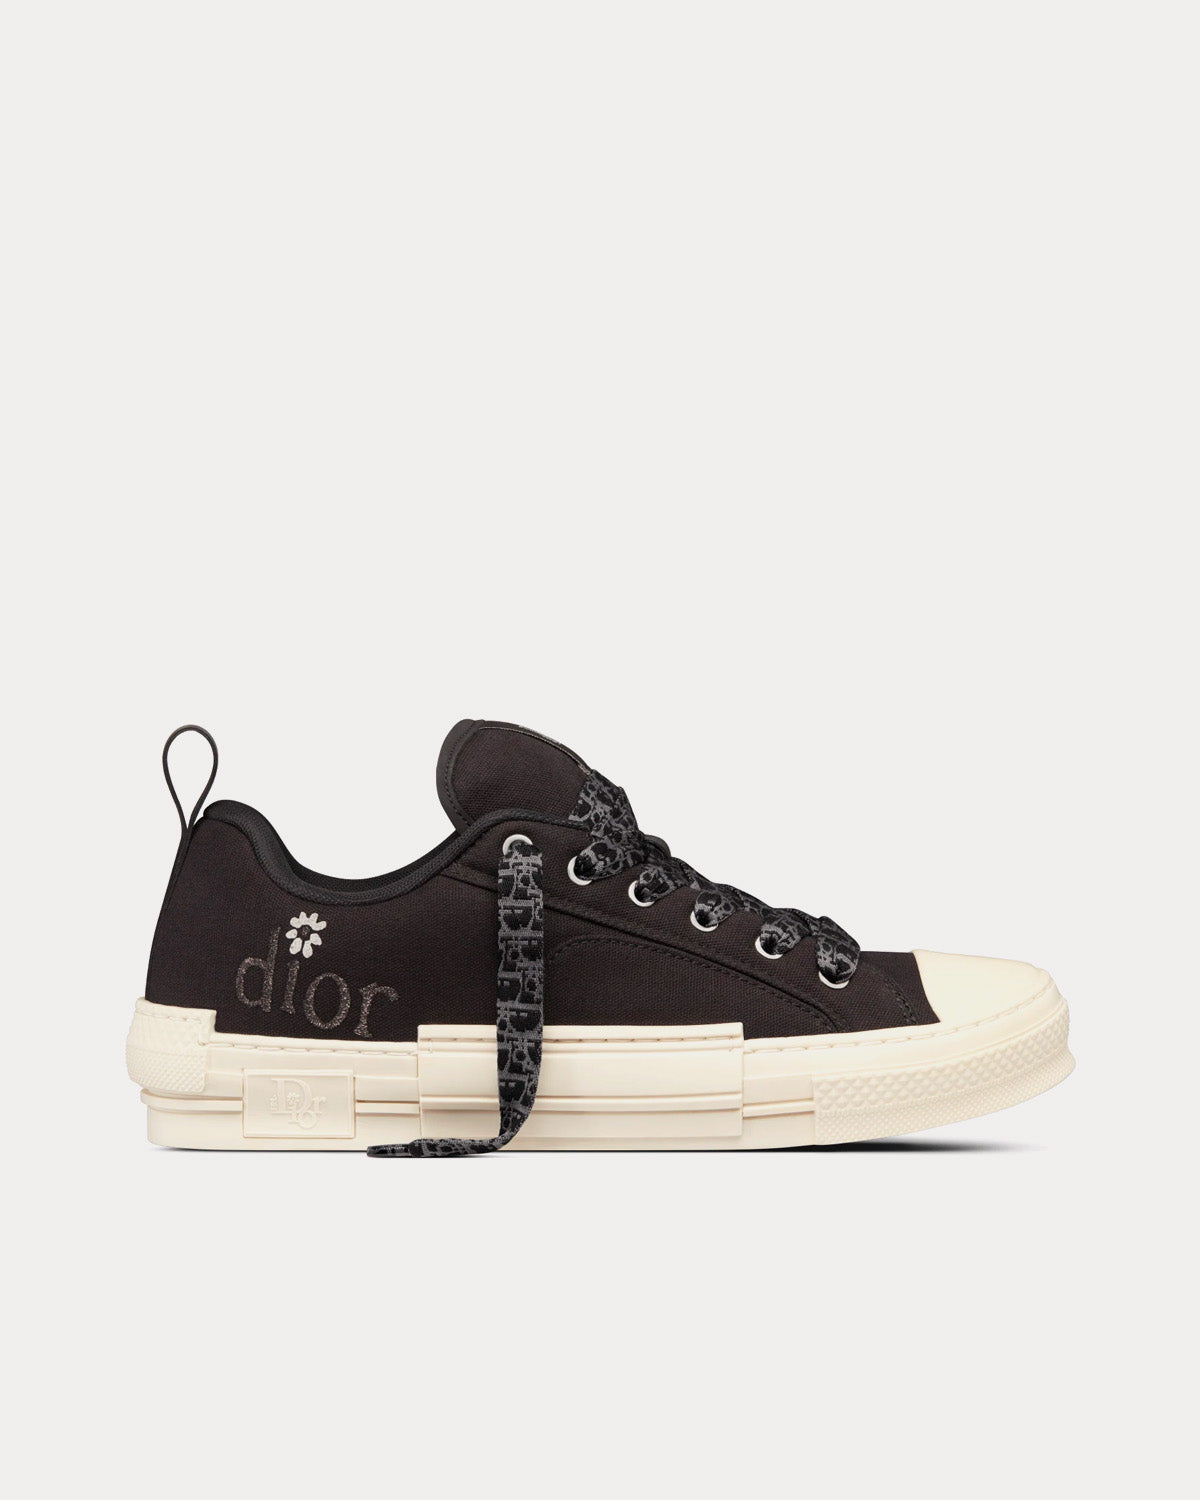 Dior x ERL - B23 Skater Black Cotton Canvas Low Top Sneakers